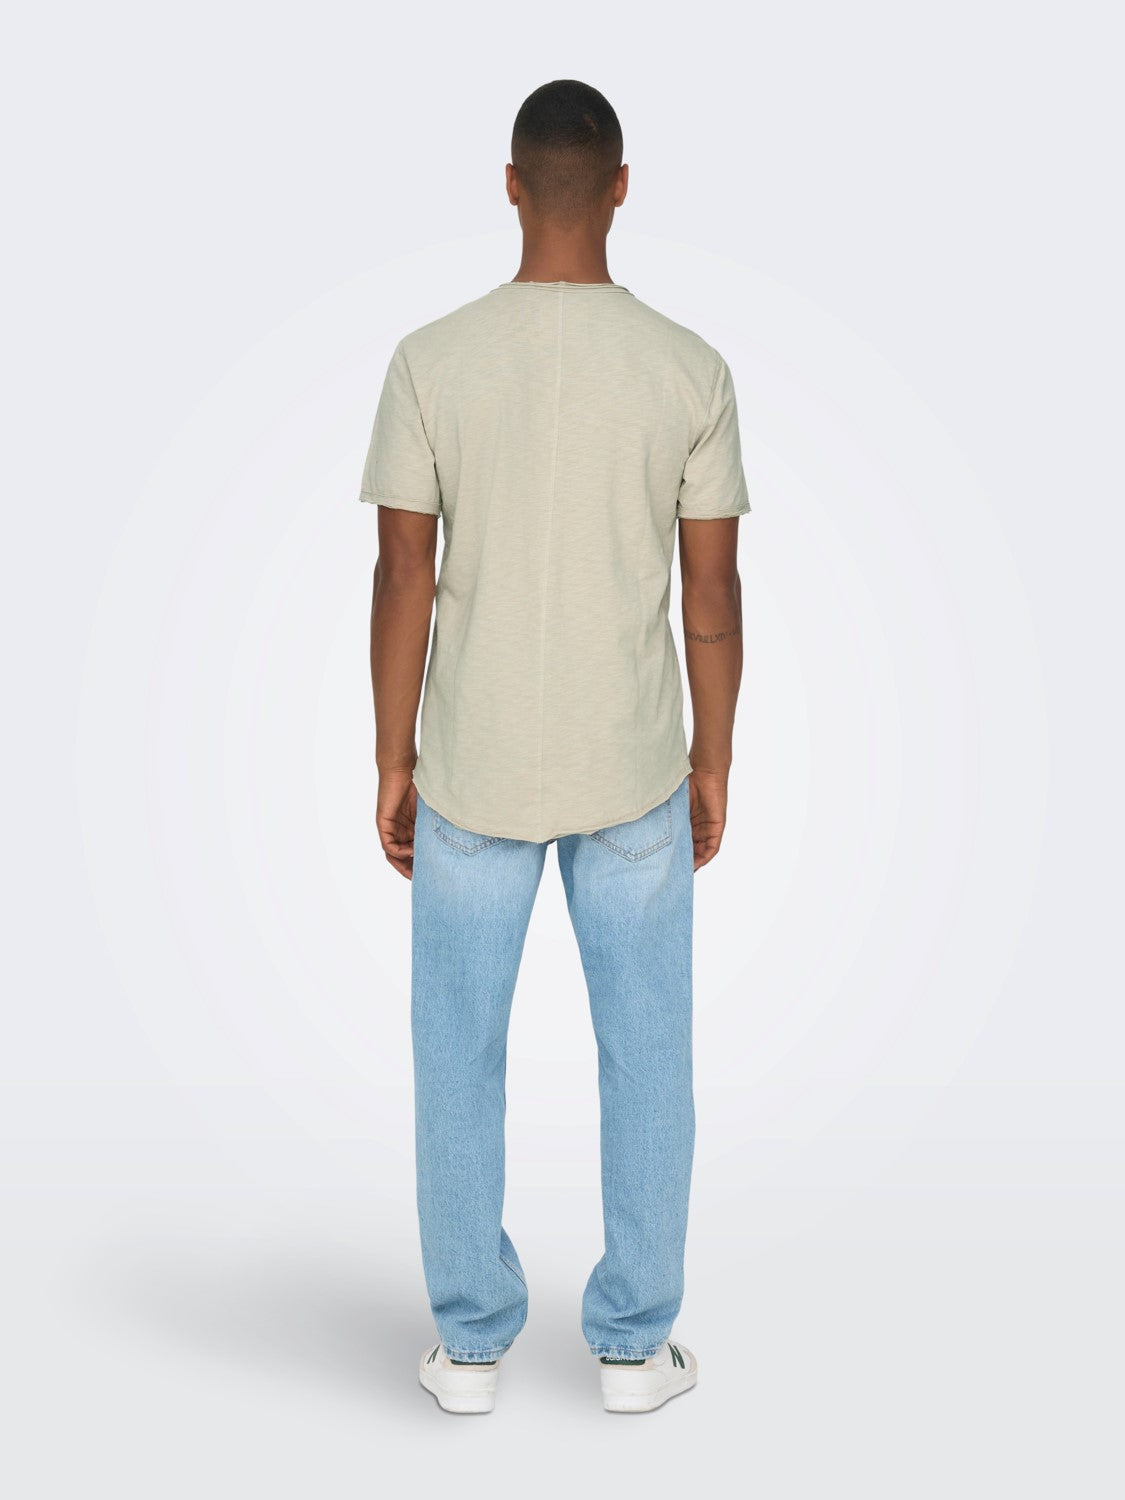 ONLY & SONS T-SHIRT BASIC  - Col. Beige